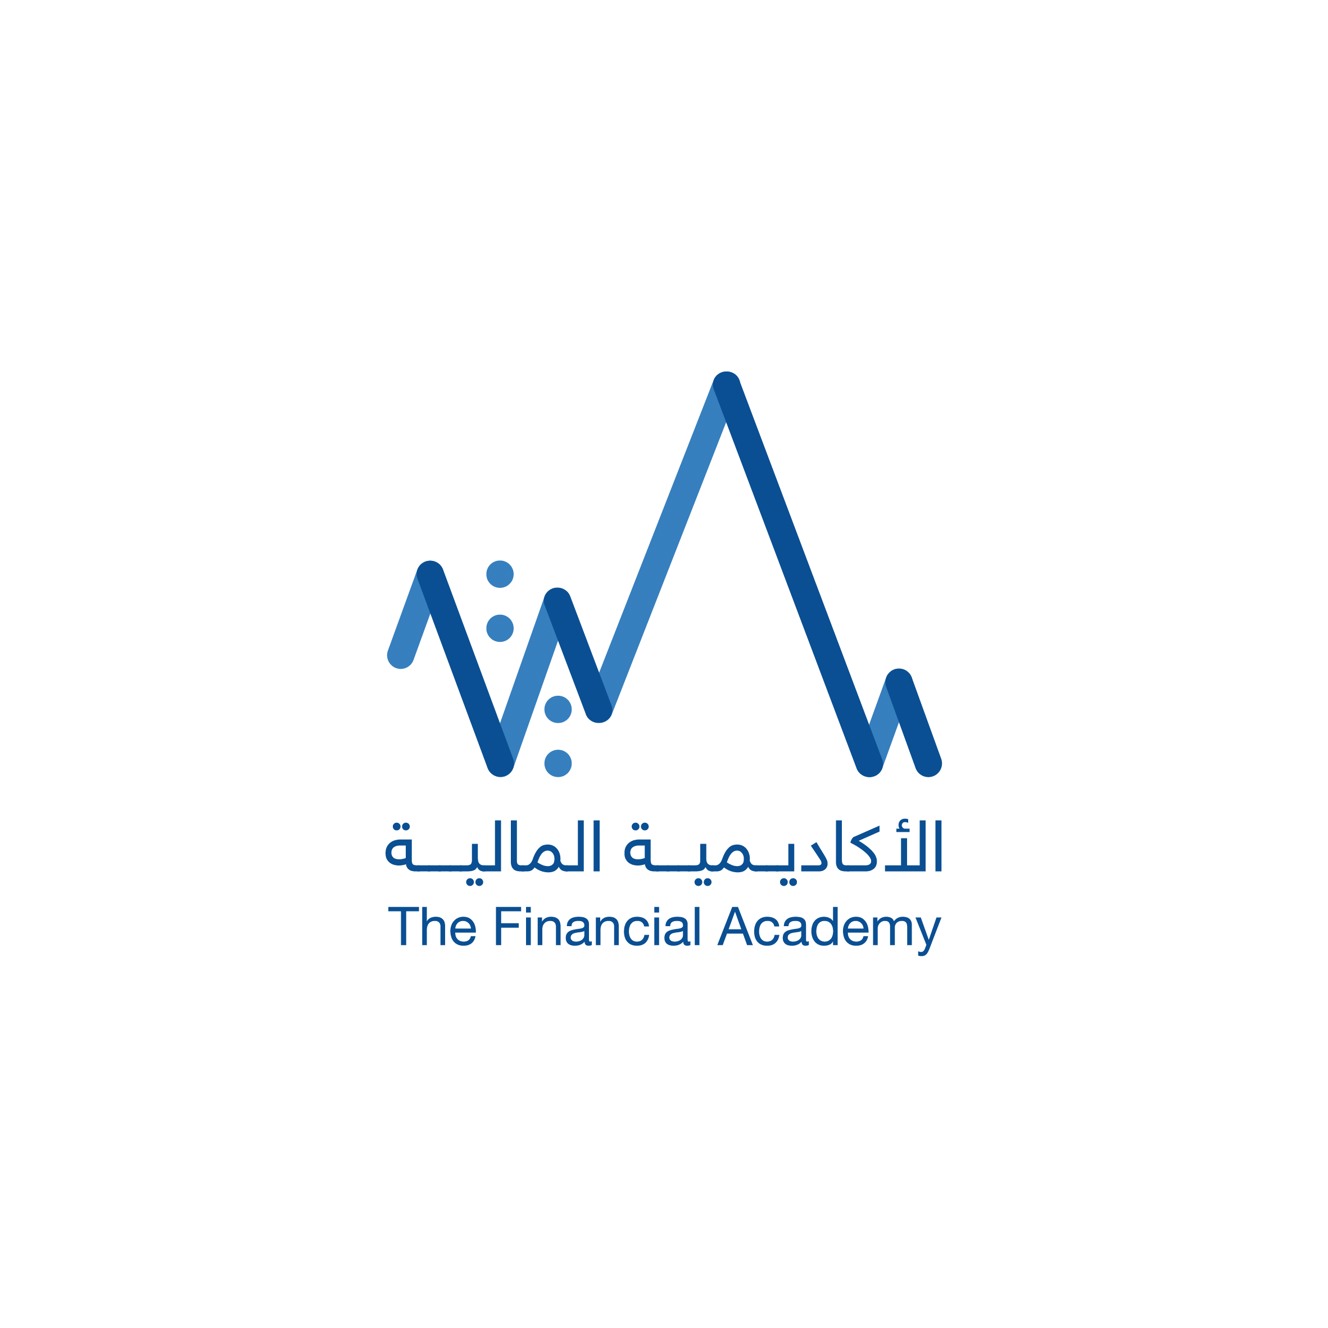 The Financial Academy Awarded Full Institutional Accreditation by ETEC